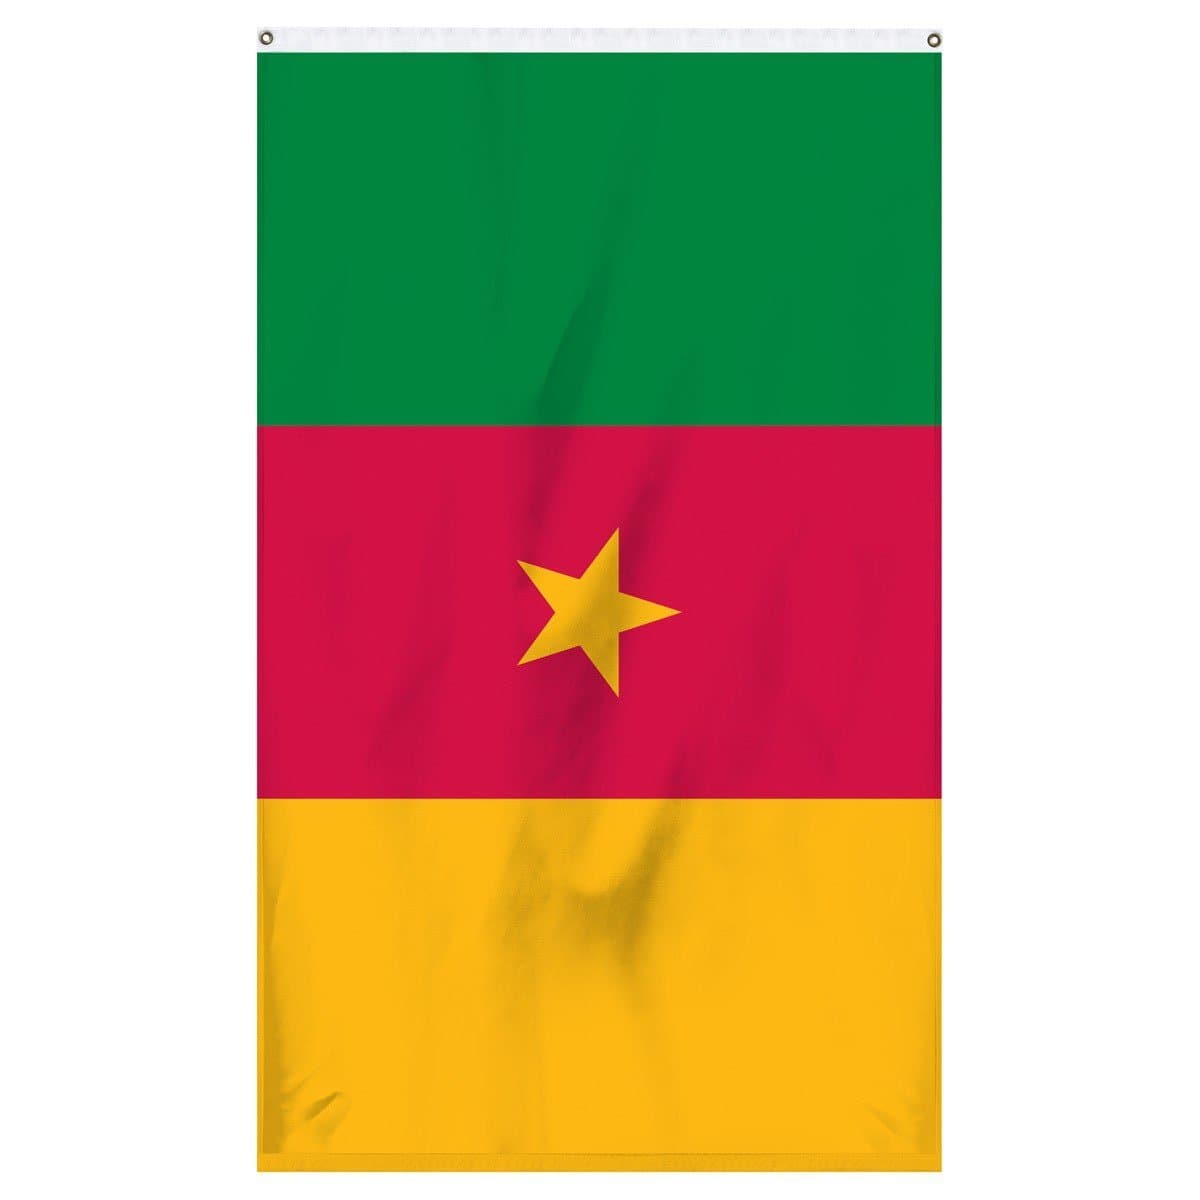 Cameroon international flag for sale to fly on flagpoles, parades, or for collectors